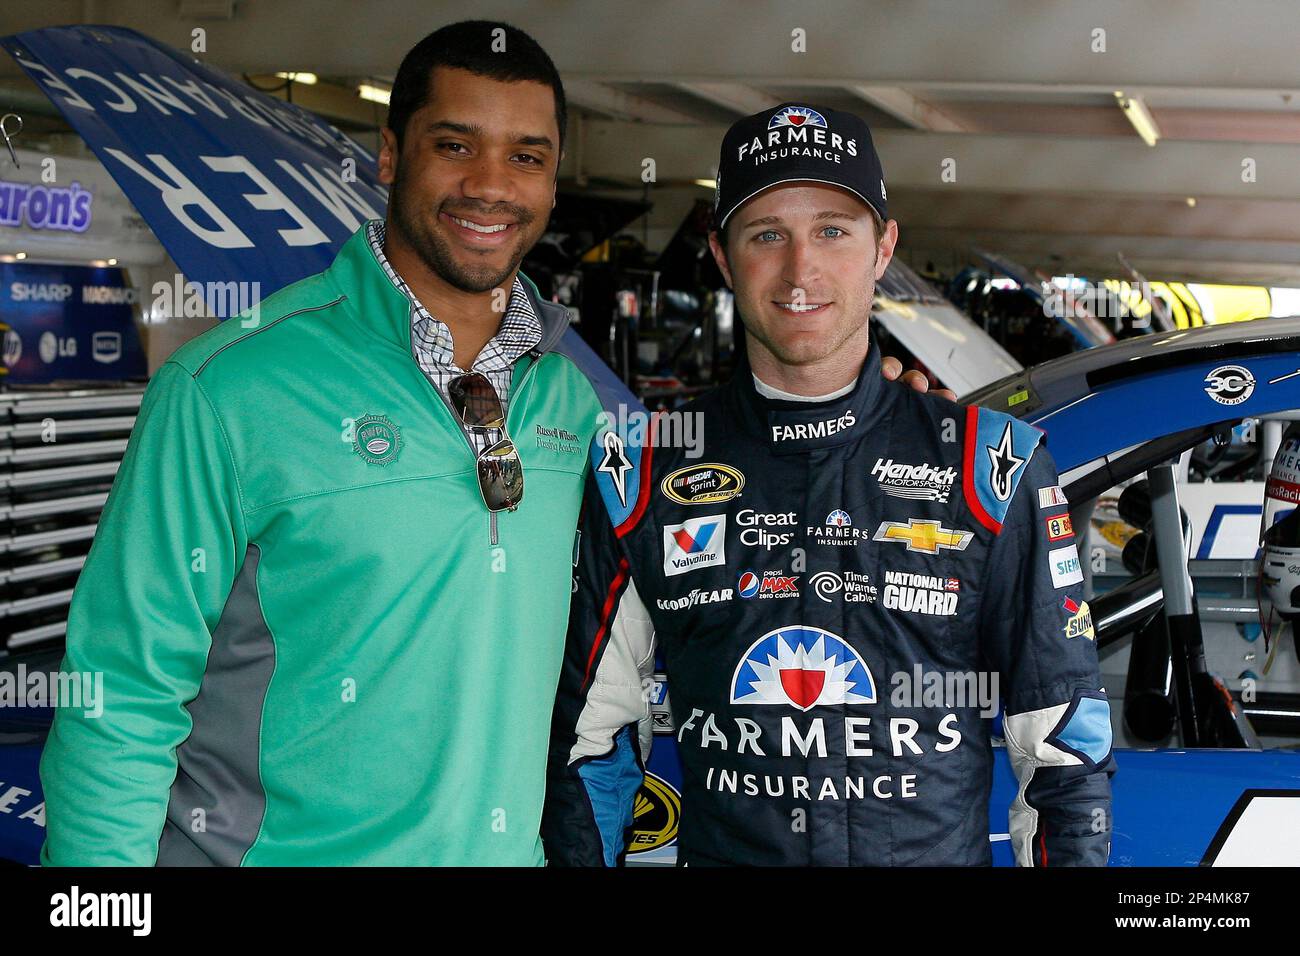 https://c8.alamy.com/comp/2P4MK87/seattle-seahawks-quarterback-russell-wilson-and-kasey-kahne-during-practice-for-the-nascar-sprint-cup-series-the-profit-on-cnbc-500-race-at-phoenix-international-raceway-saturday-march-1-2014-in-avondale-ariz-ap-photonkp-russell-labounty-mandatory-credit-2P4MK87.jpg